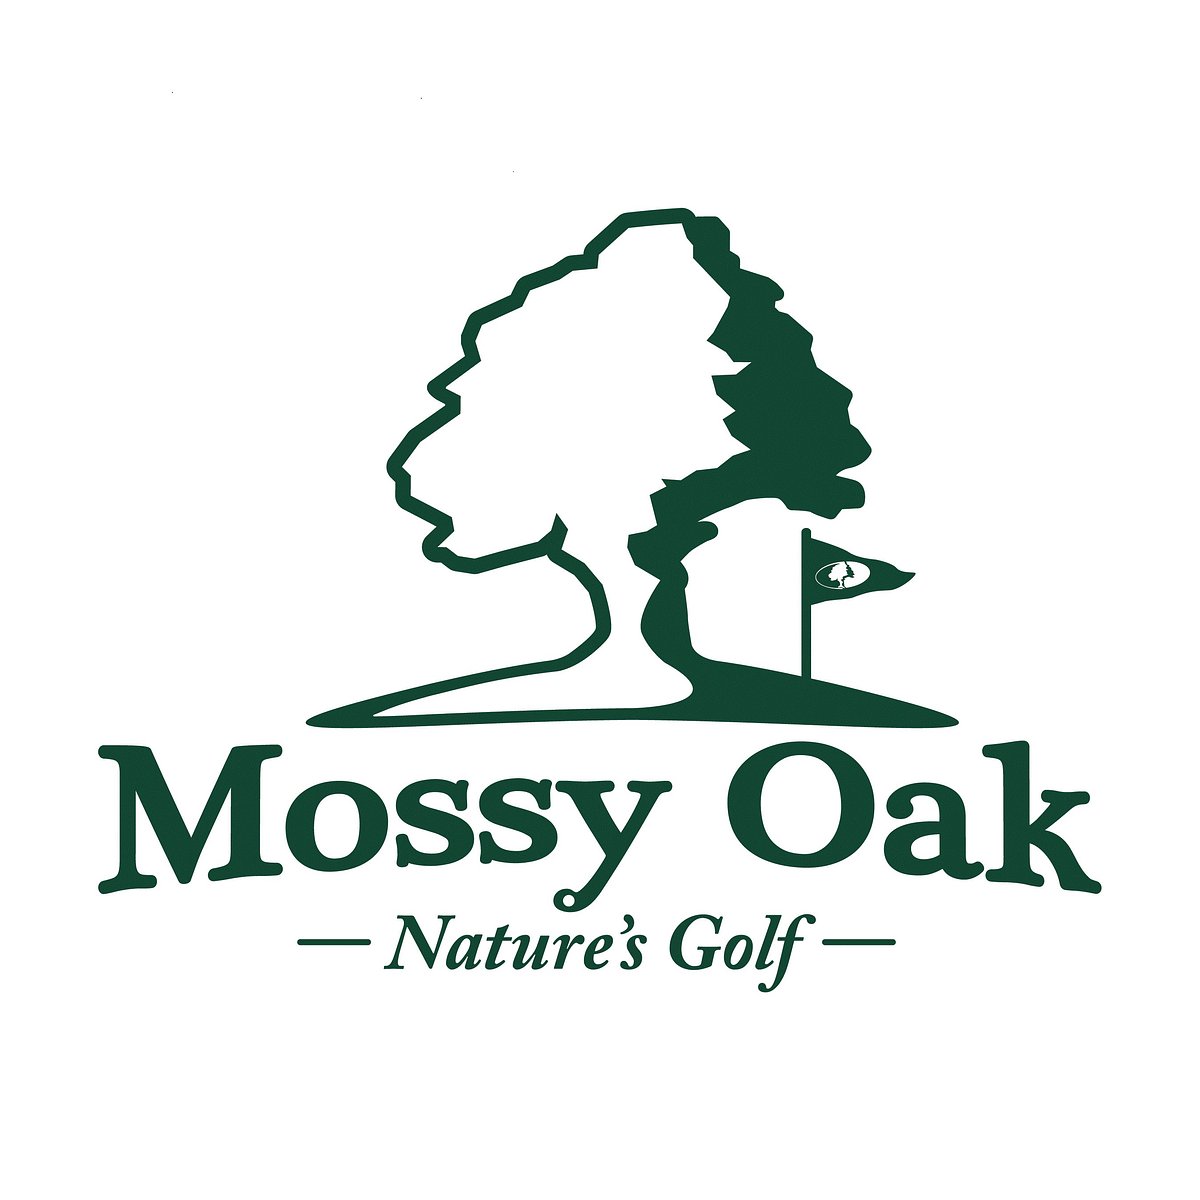 Mossy Oak: Gil Hanse's First Golf Course Since Olympic Success Is